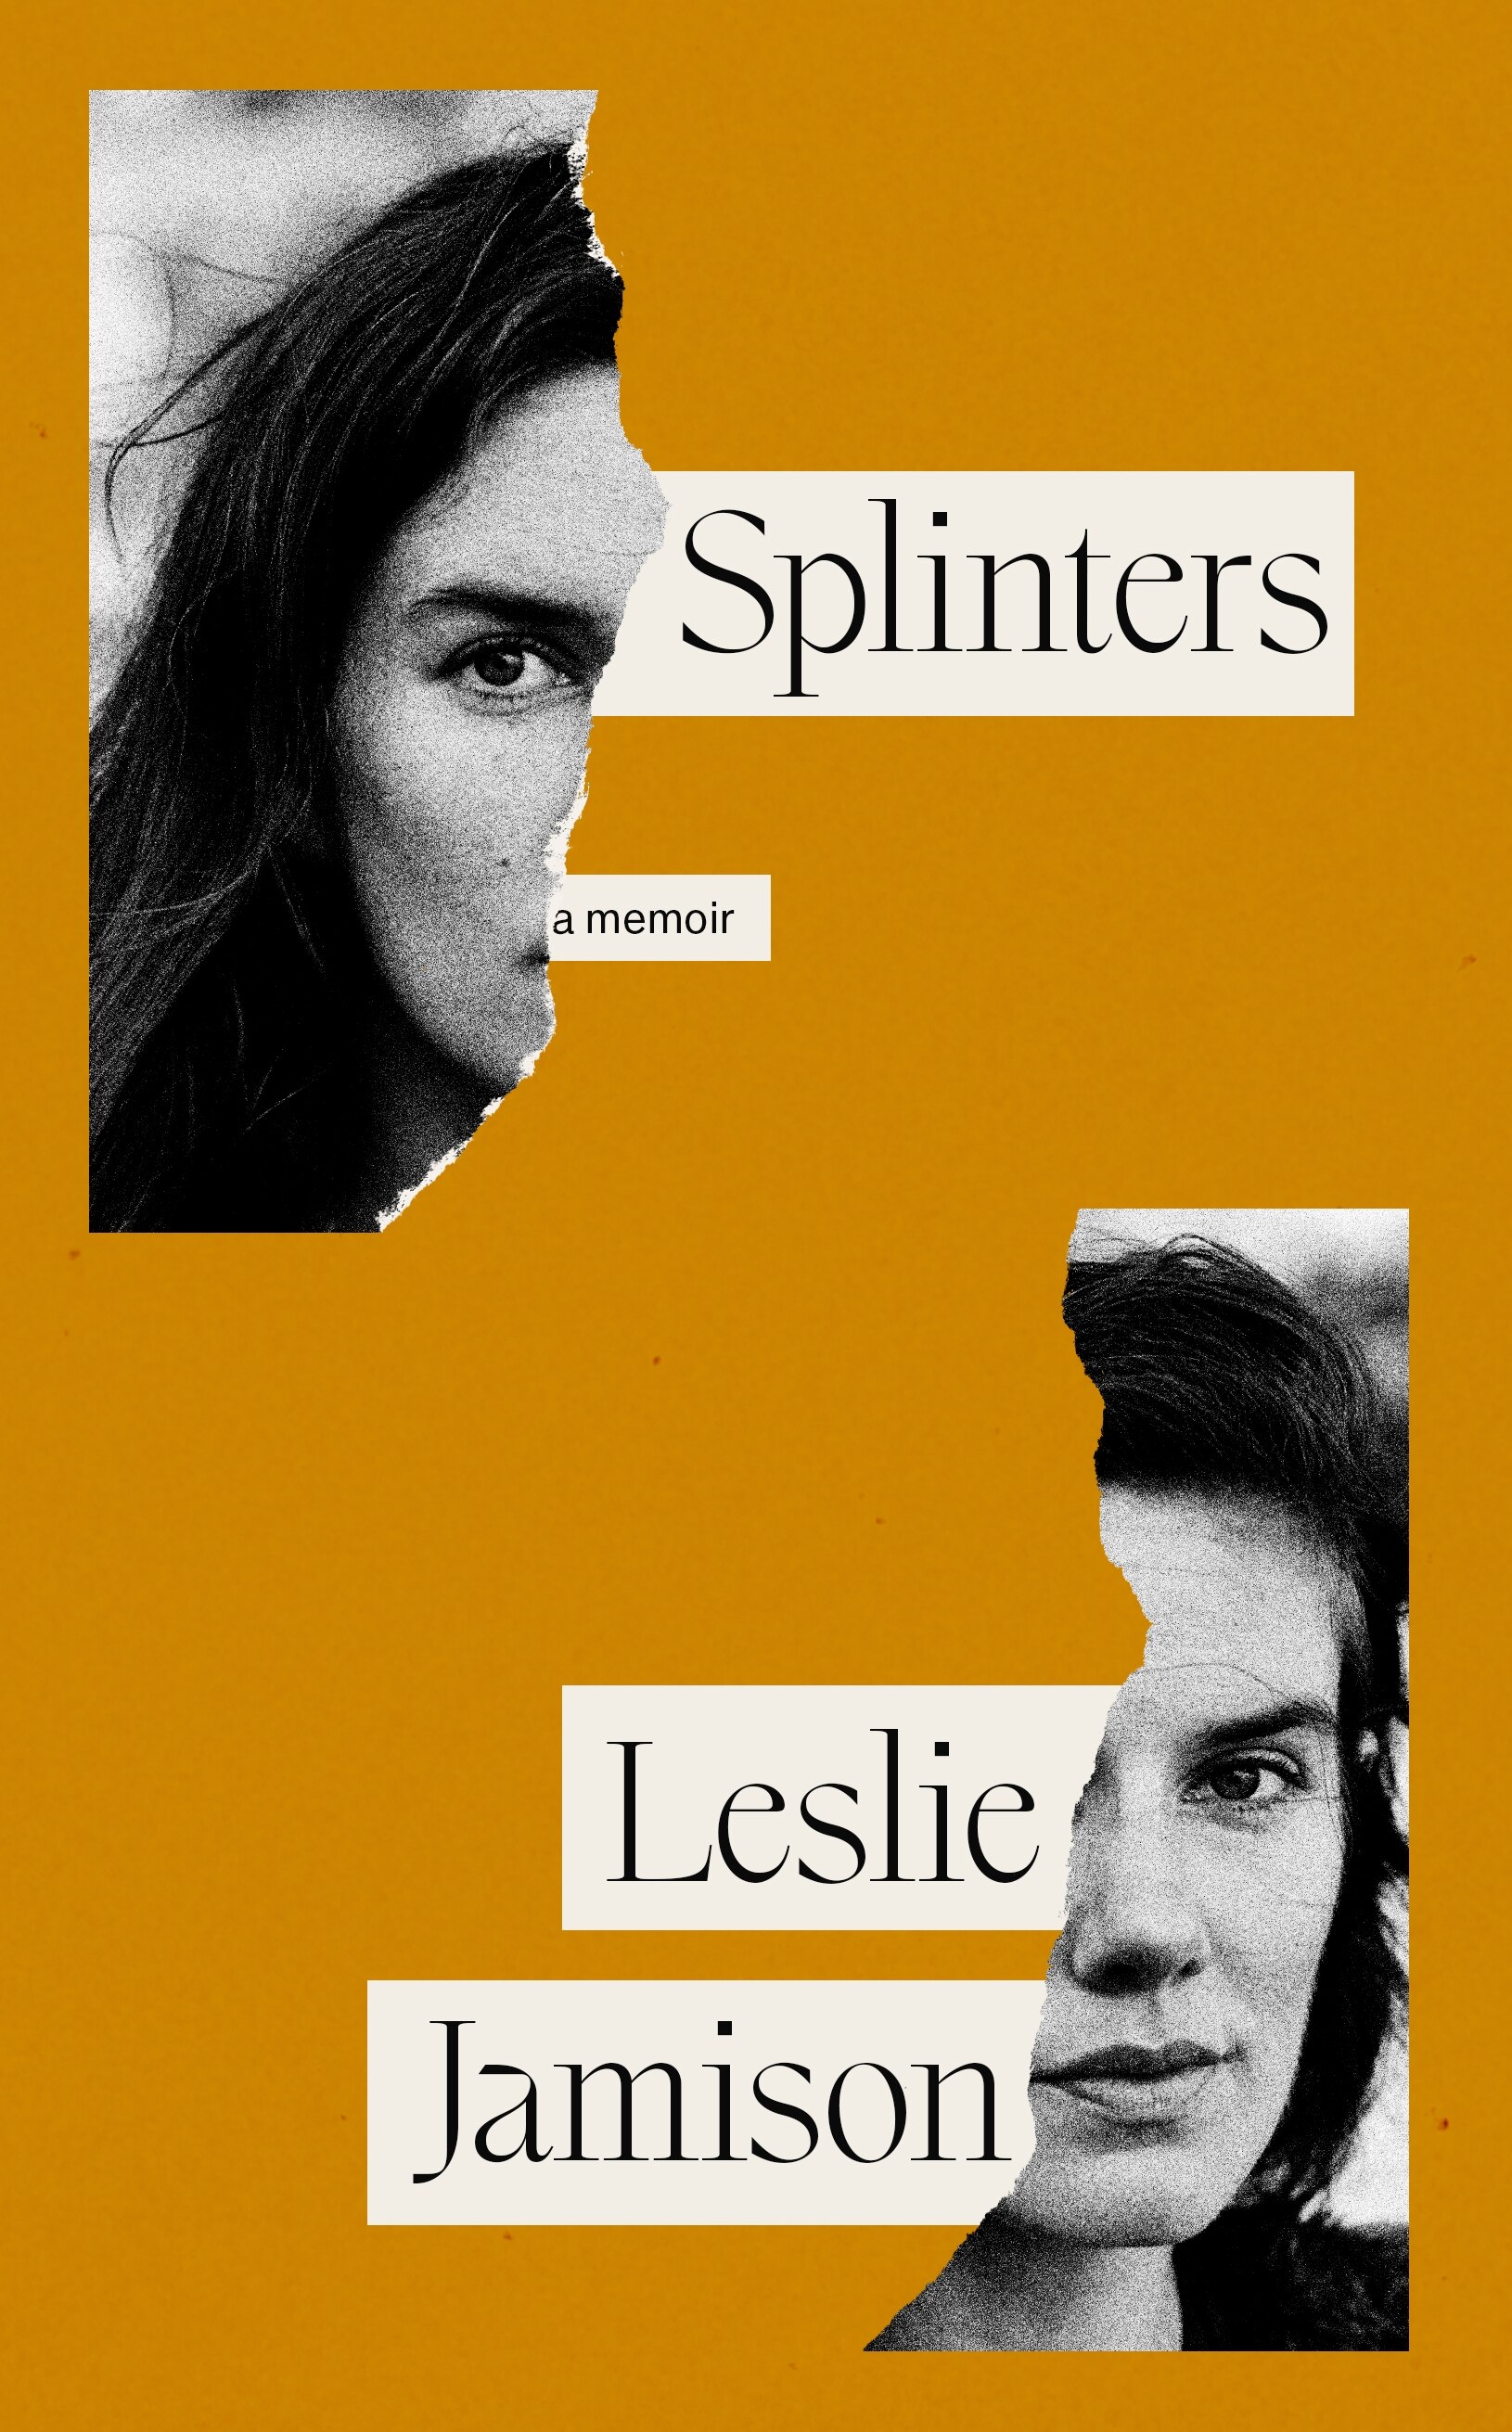 A book cover for Splinters by Leslie Jamison. It is yellow and features a photographer of the author torn in two.